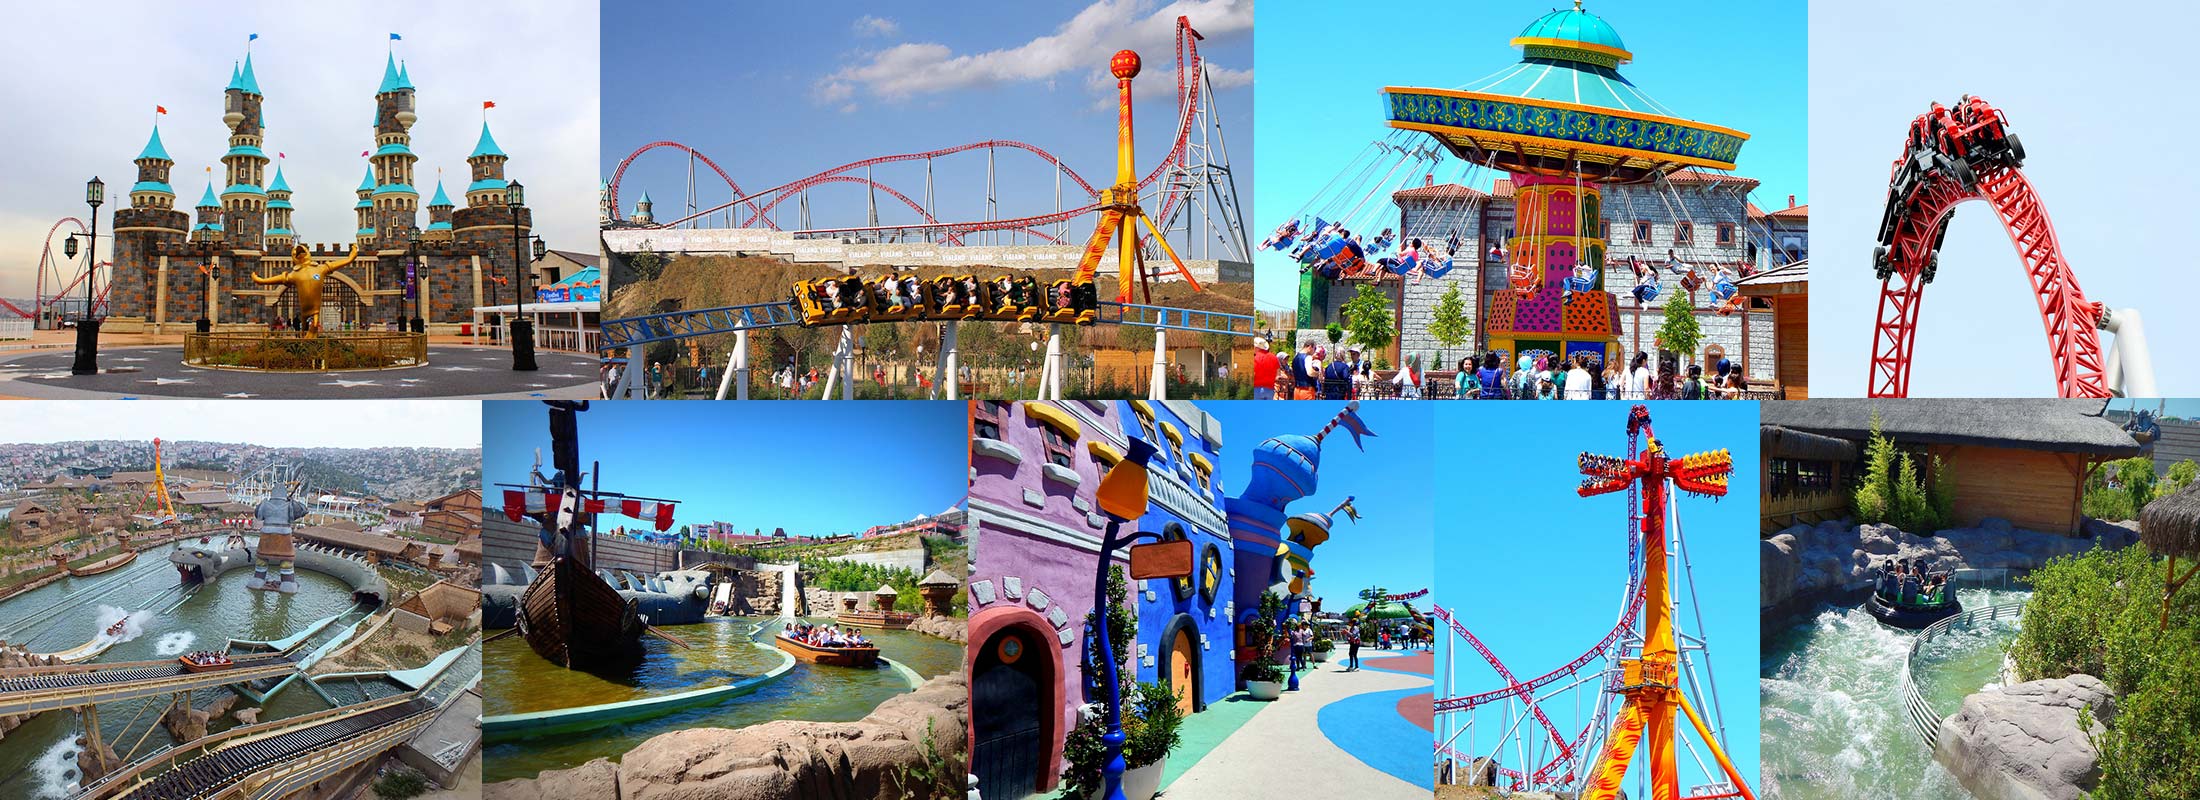 ISTANBUL VIALAND THEME PARK and SHOPPING MALL TOUR